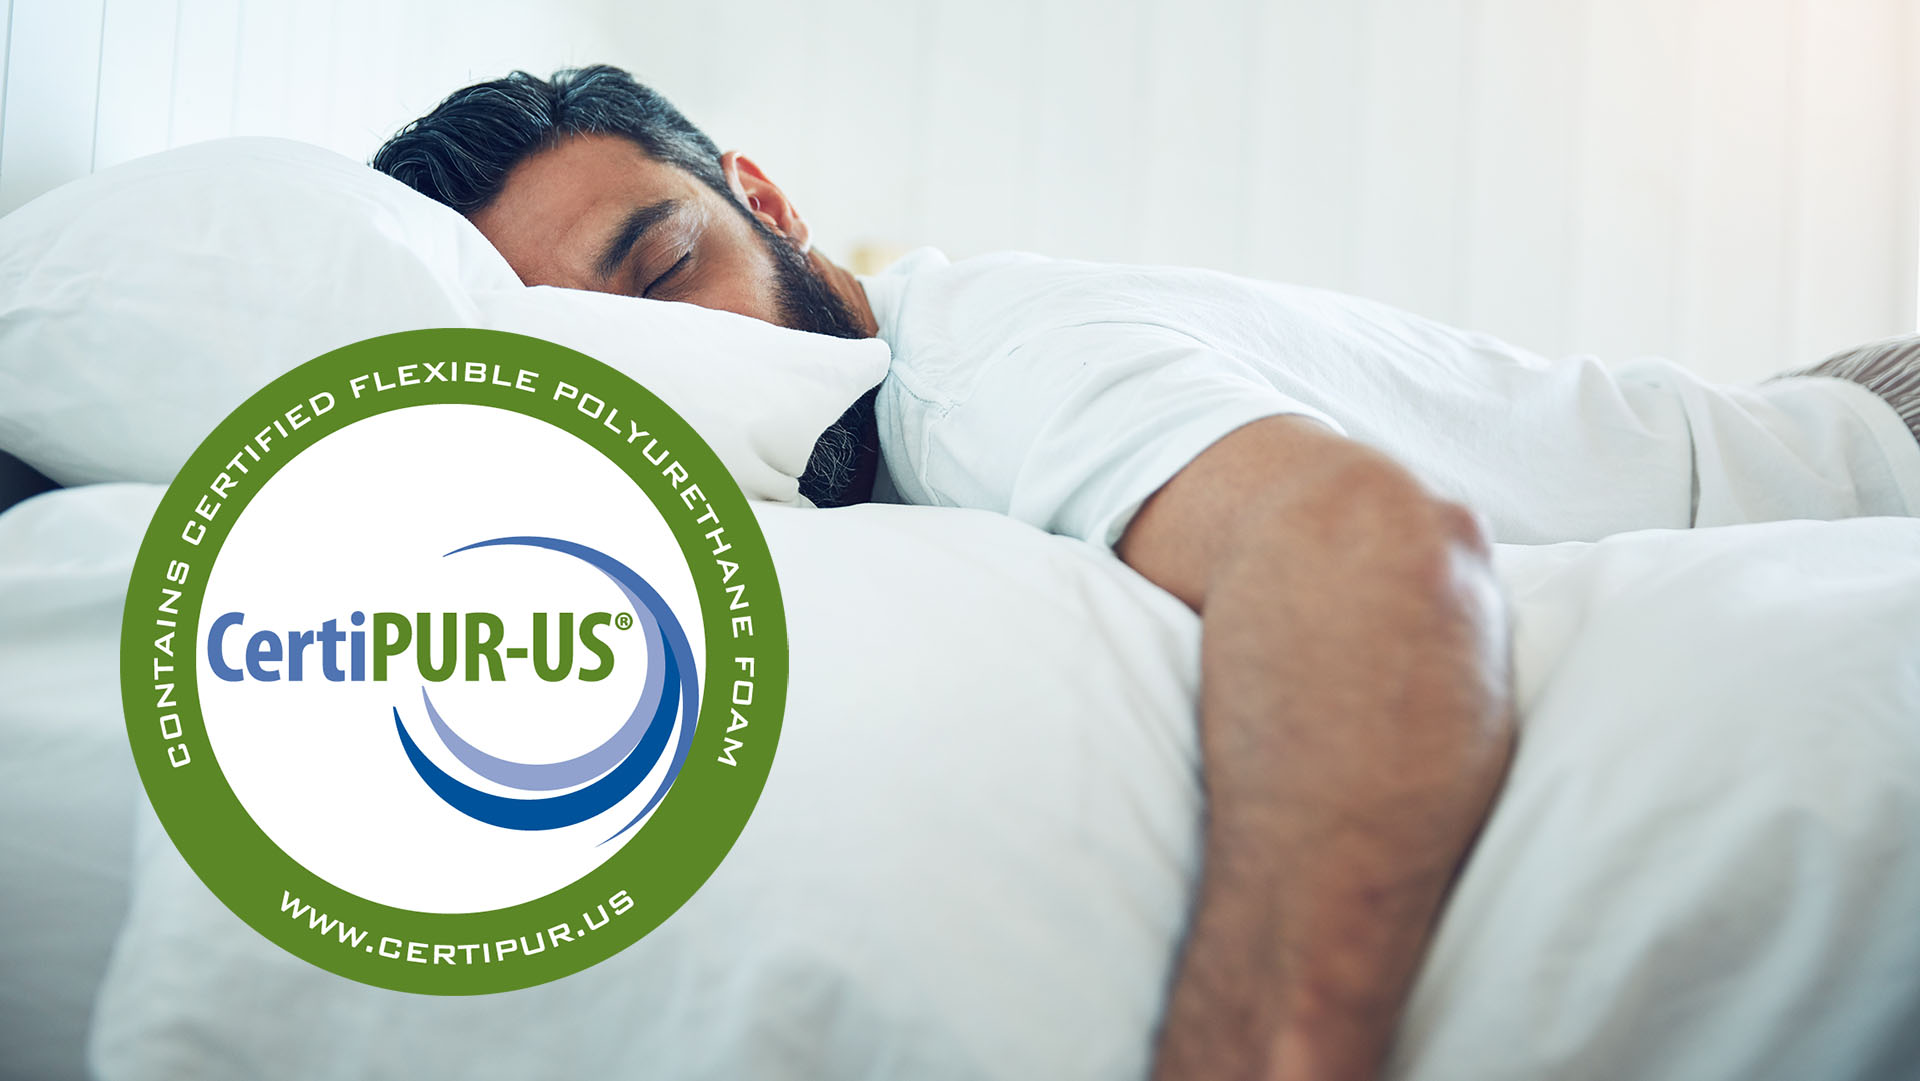 can i wash a certipur-us mattress cover